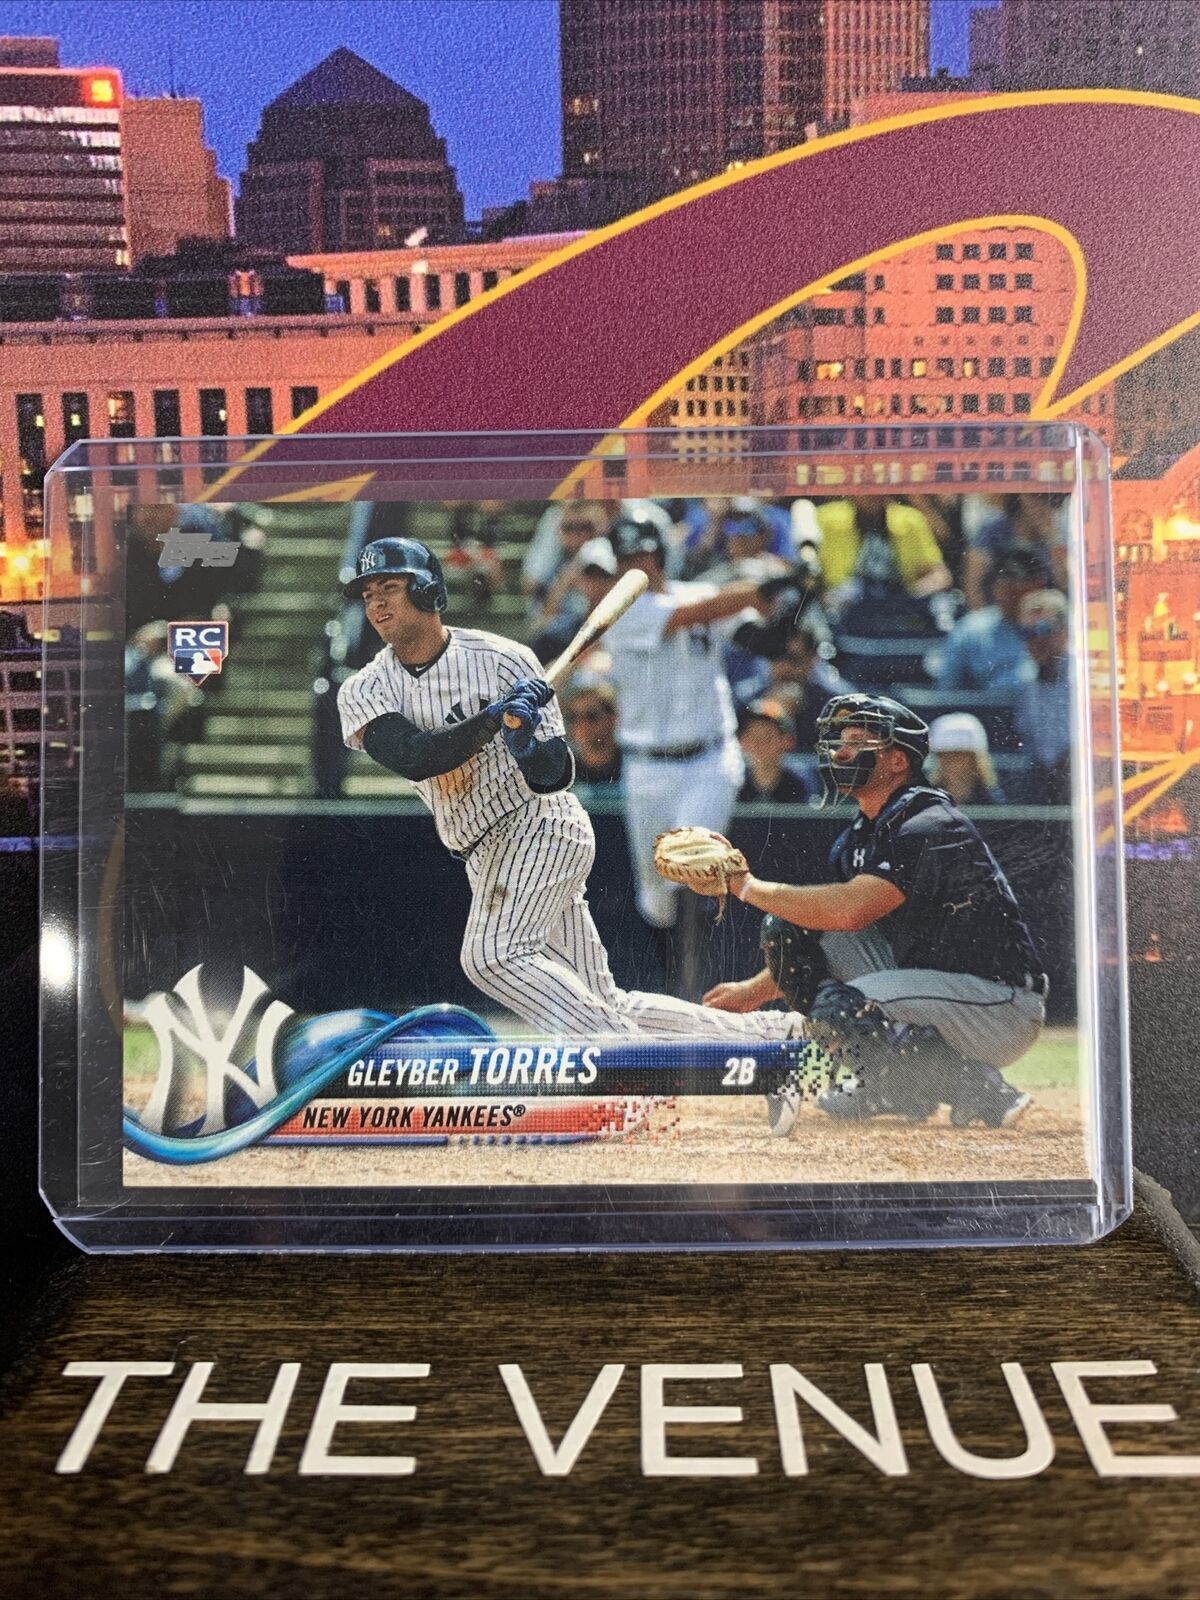 2018 Topps Series 2 #699 Gleyber Torres Rookie Card RC - New York